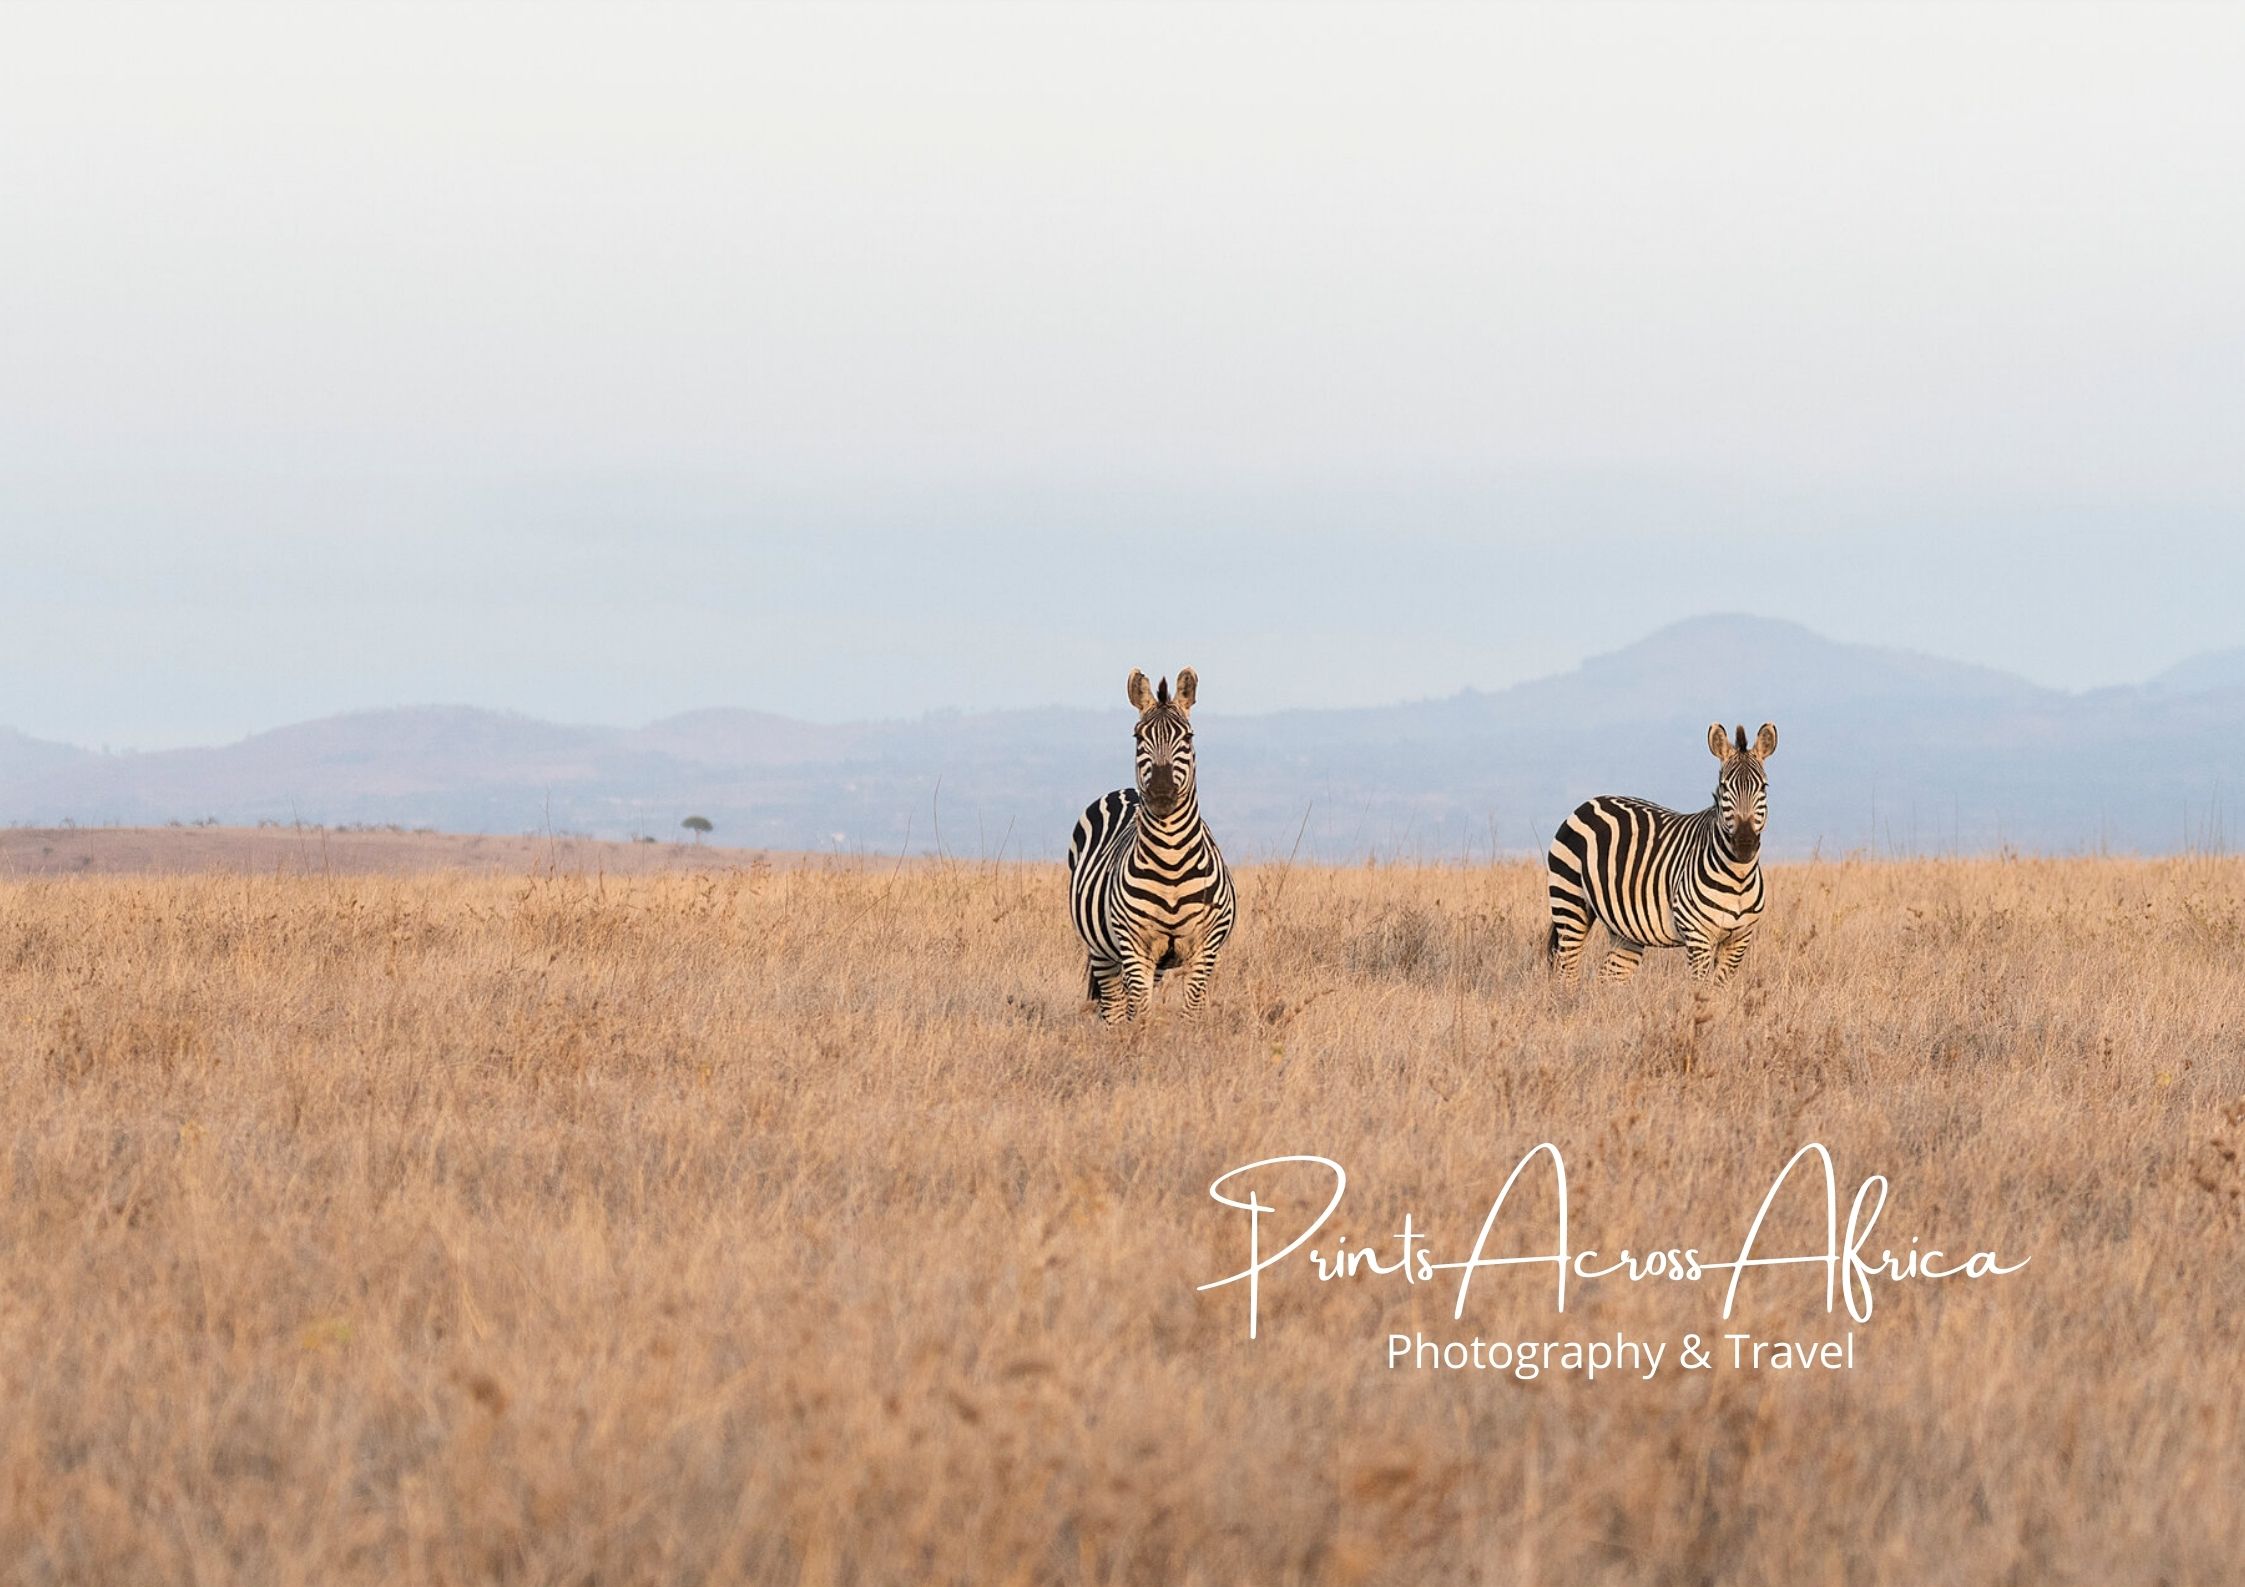 Two zebras in the distance